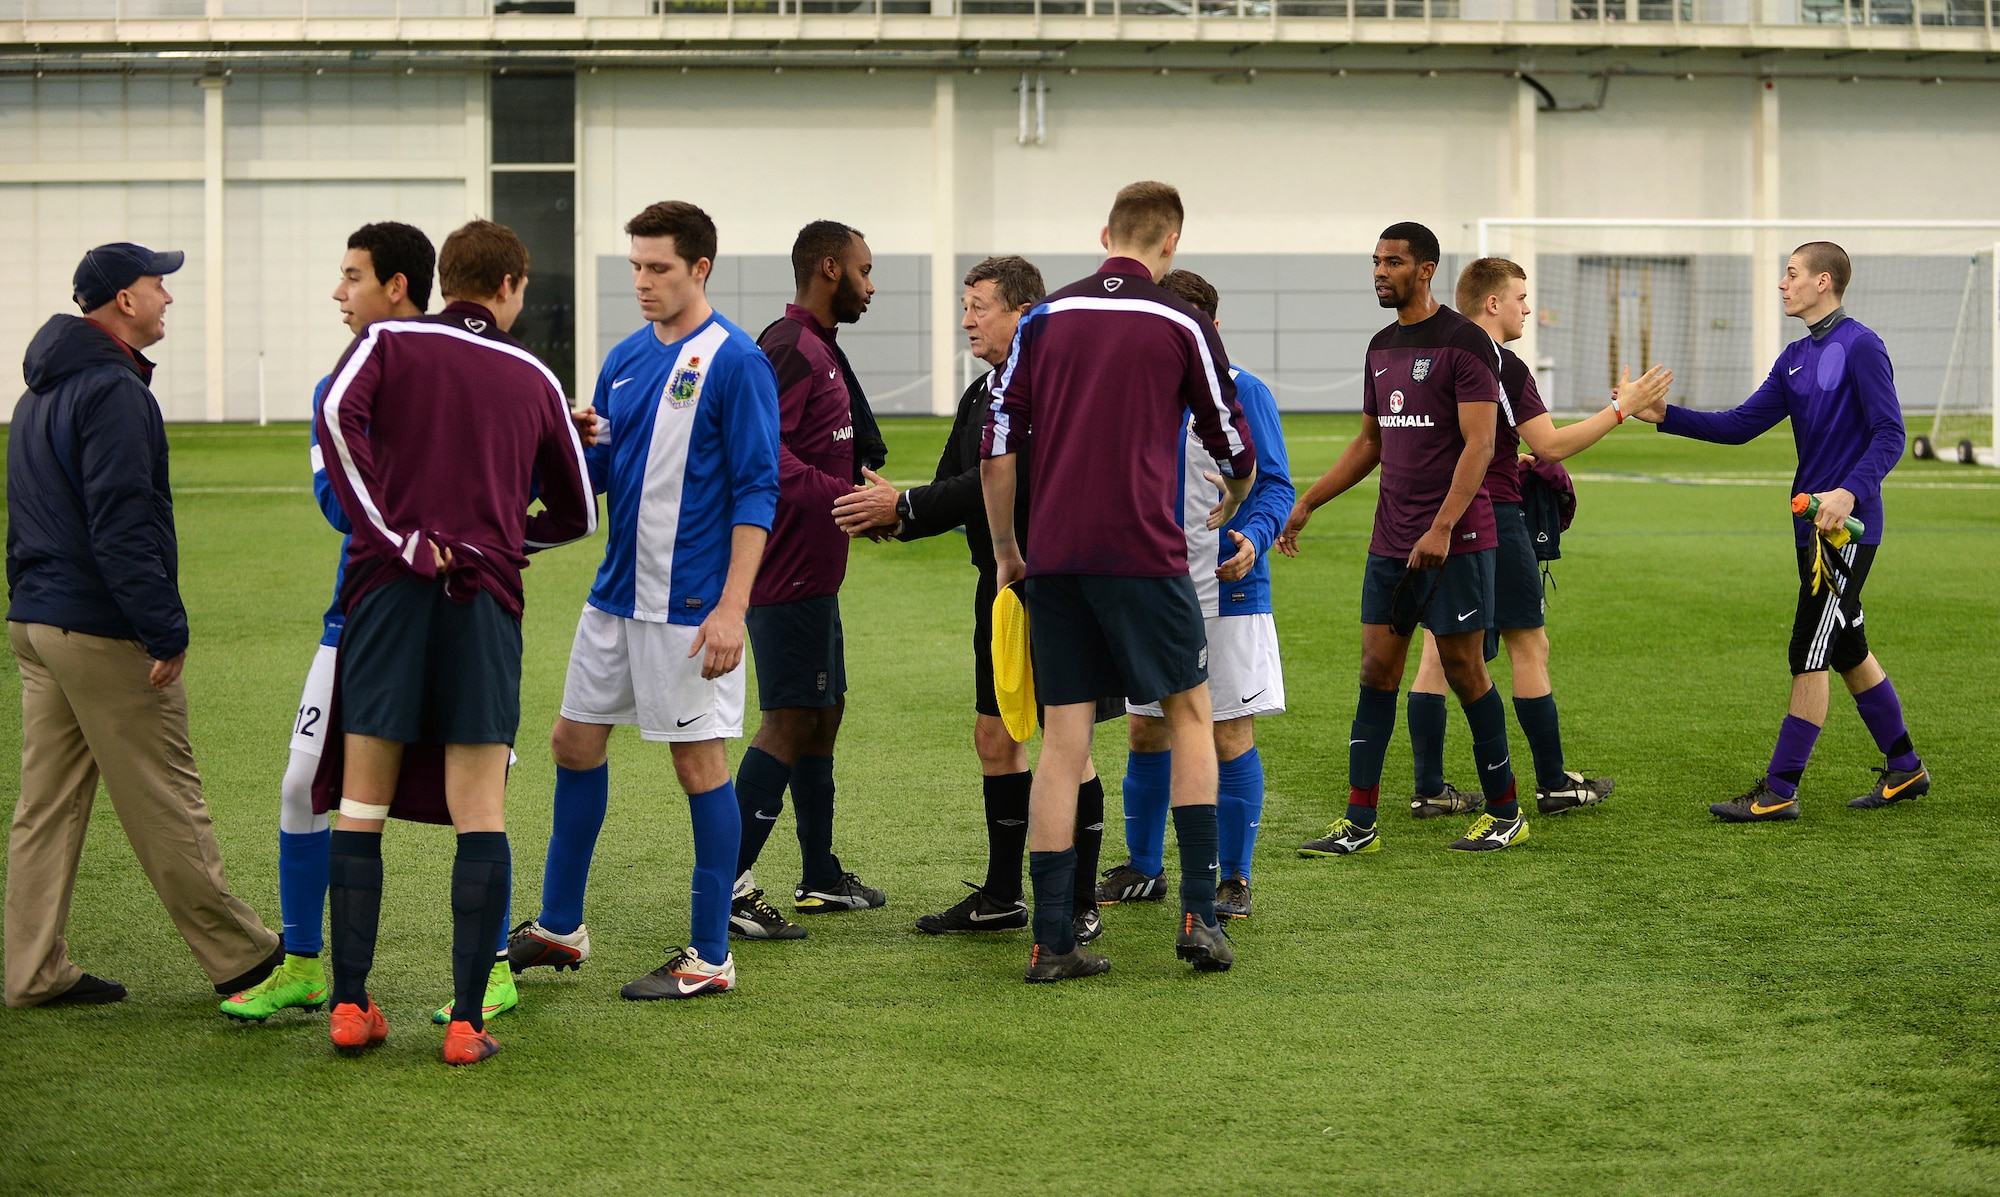 Members of the Liberty Football Club and the world-ranked England Cerebral Palsy team congratulate each other after a match at St. George’s Park, England, Jan. 25, 2015. This match highlighted the continued cooperation and relationship between the U.K. and the U.S. (U.S. Air Force photo by Staff Sgt. Emerson Nuñez/Released)